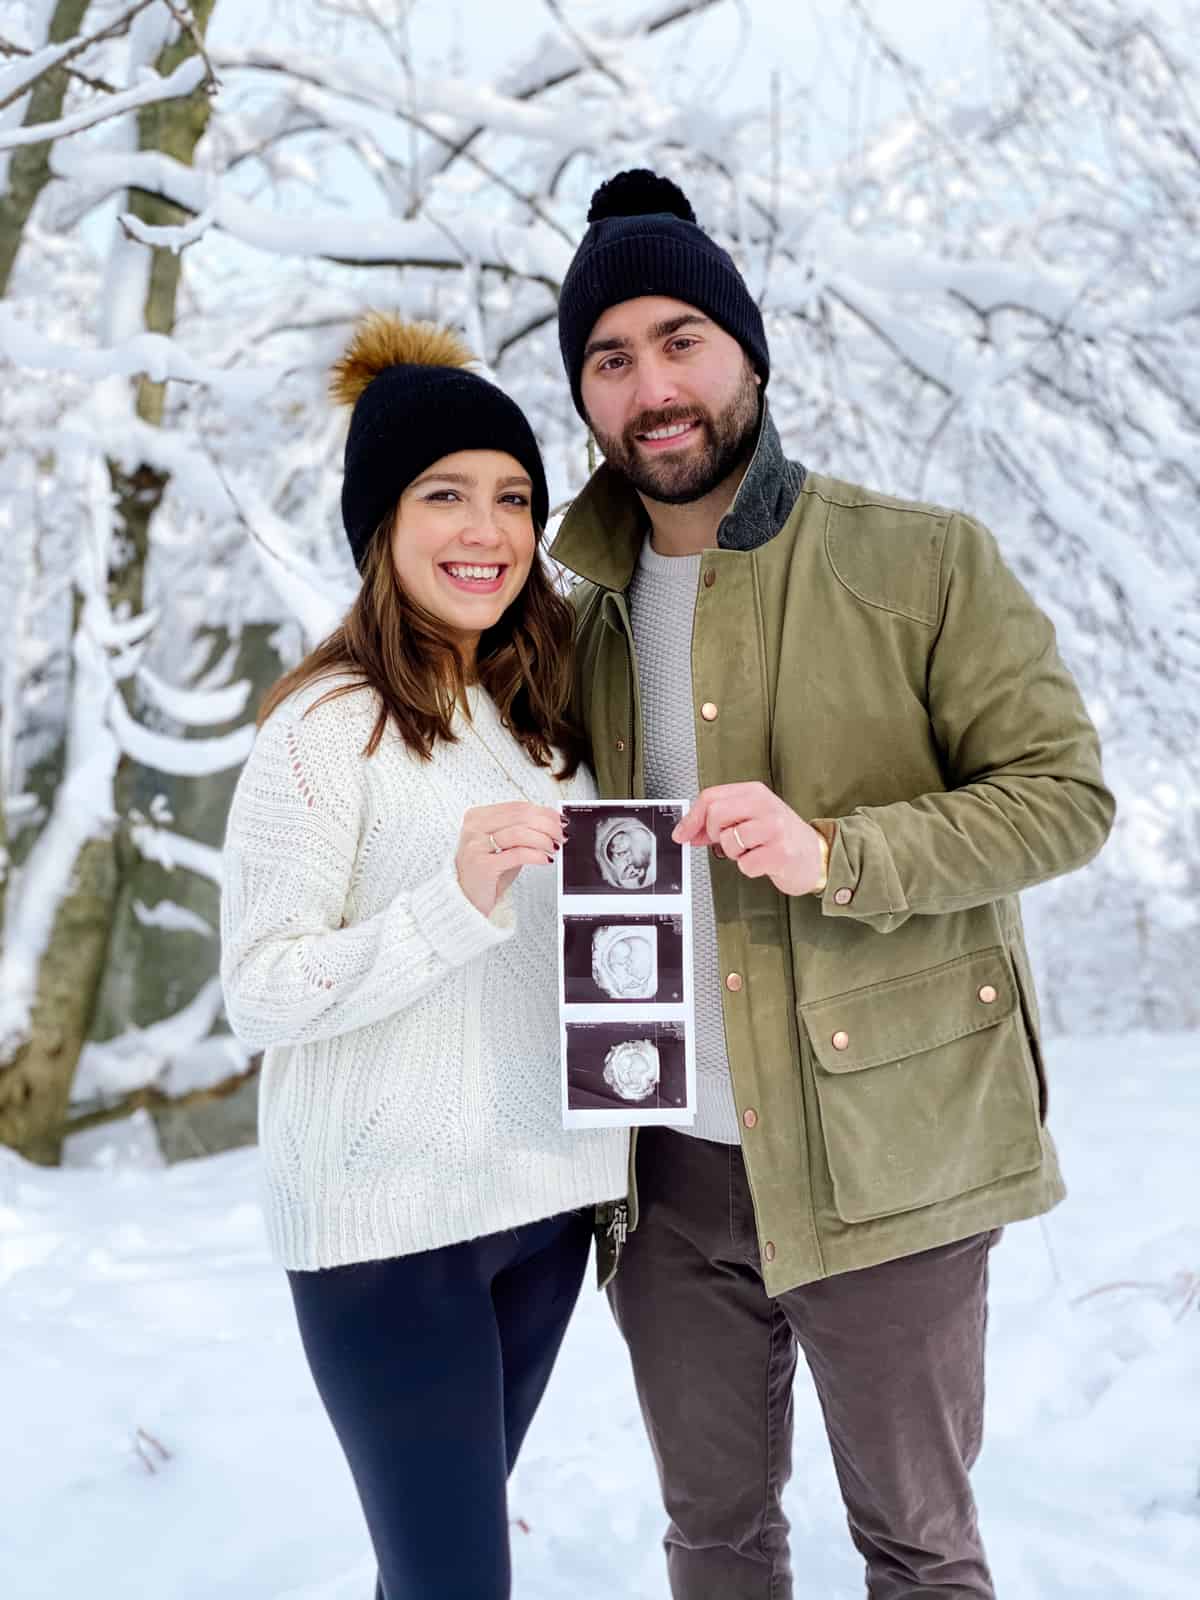 couple with pregnancy announcement holding sonogram pictures with winter snow in background